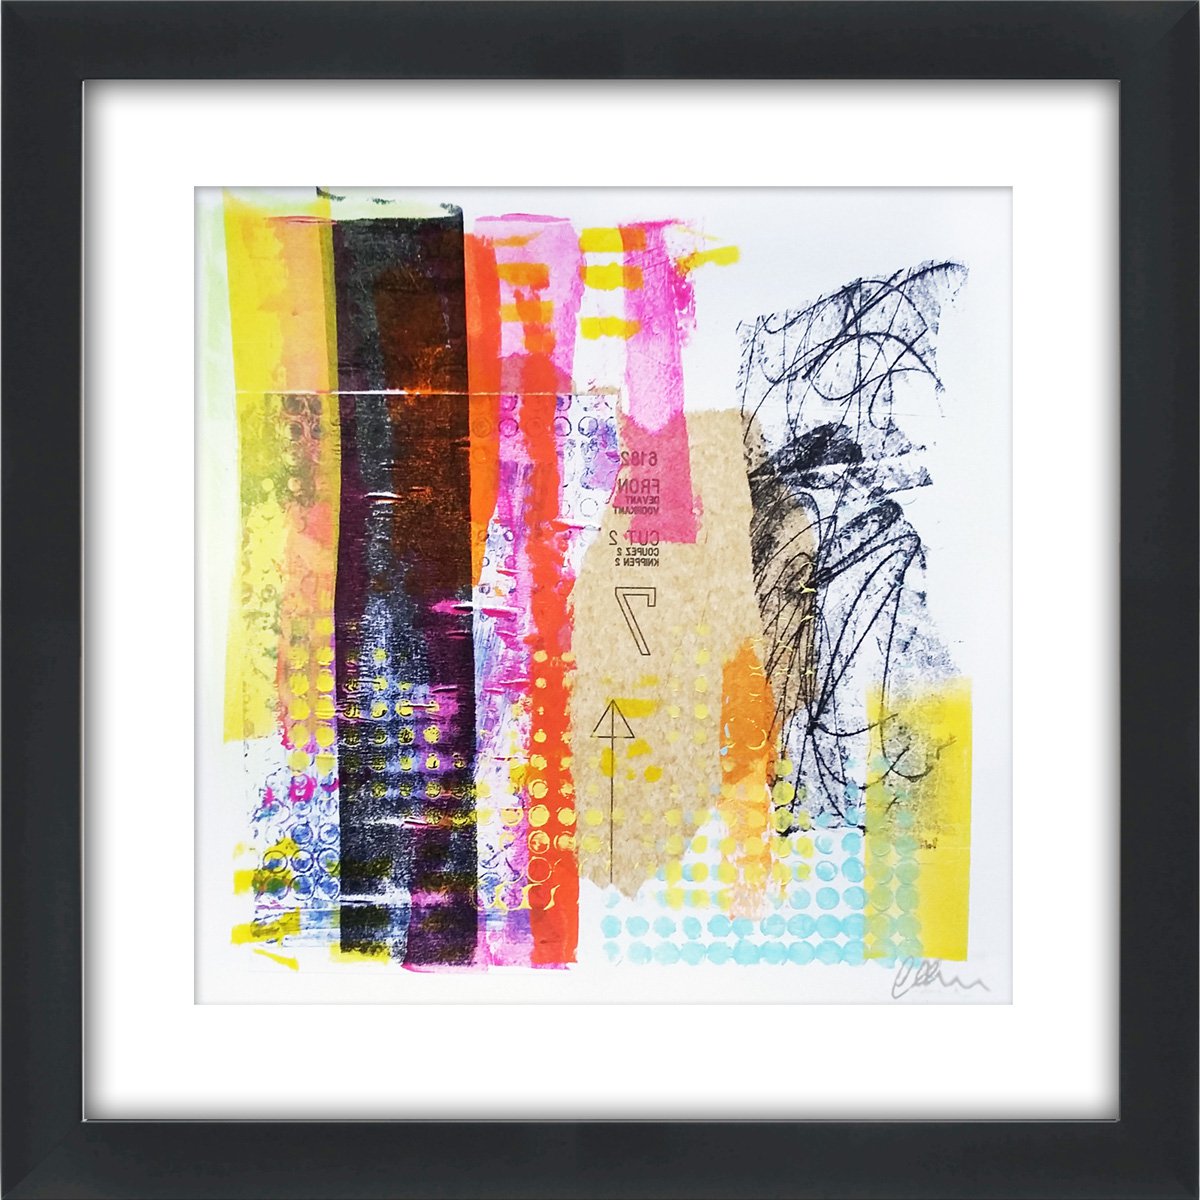 Reset - Framed and ready to hang - original abstract painting by Carolynne Coulson